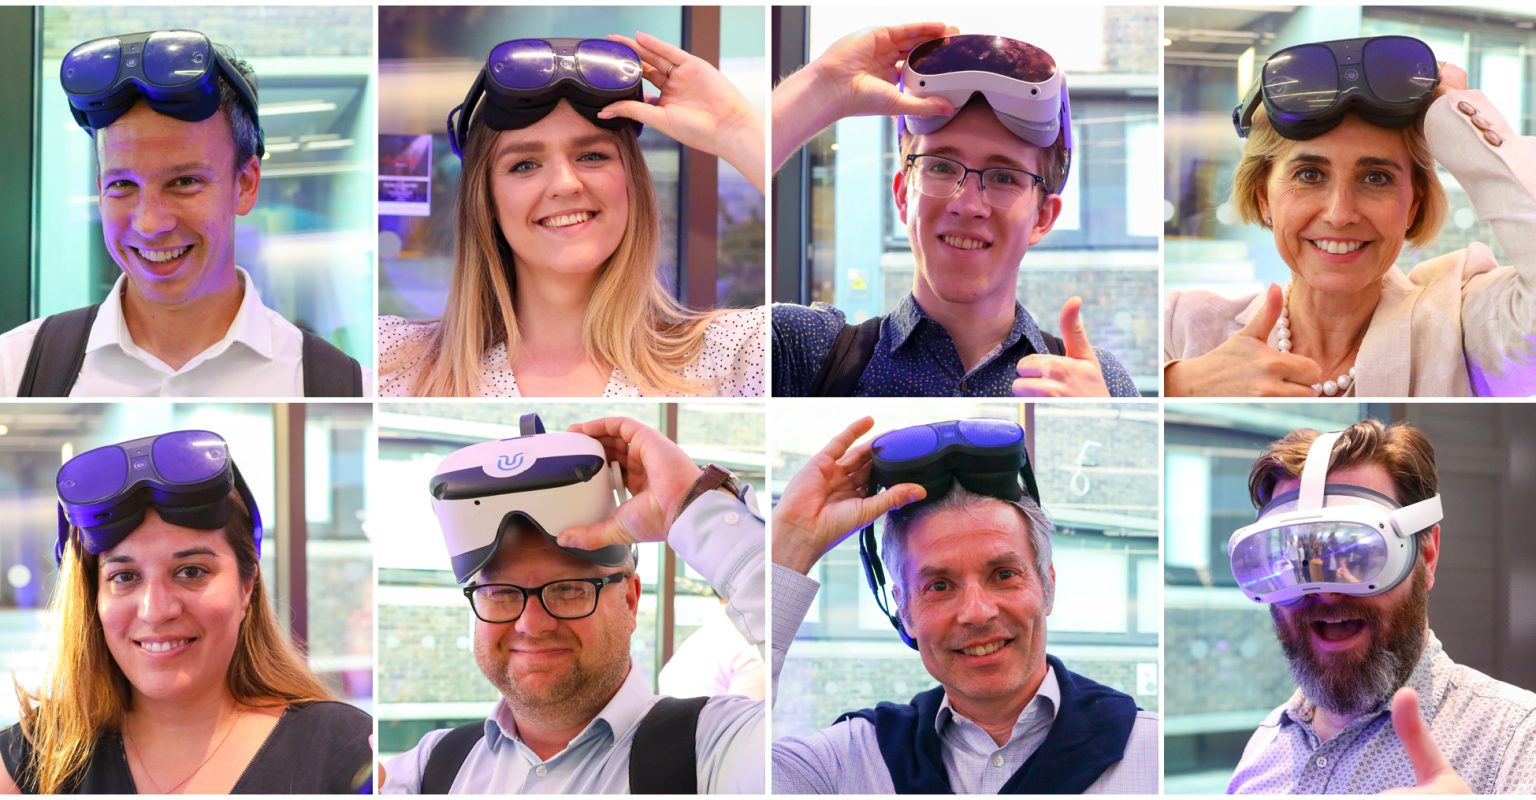 A series of people wearing VR headsets smiling or giving a thumbs-up to camera.